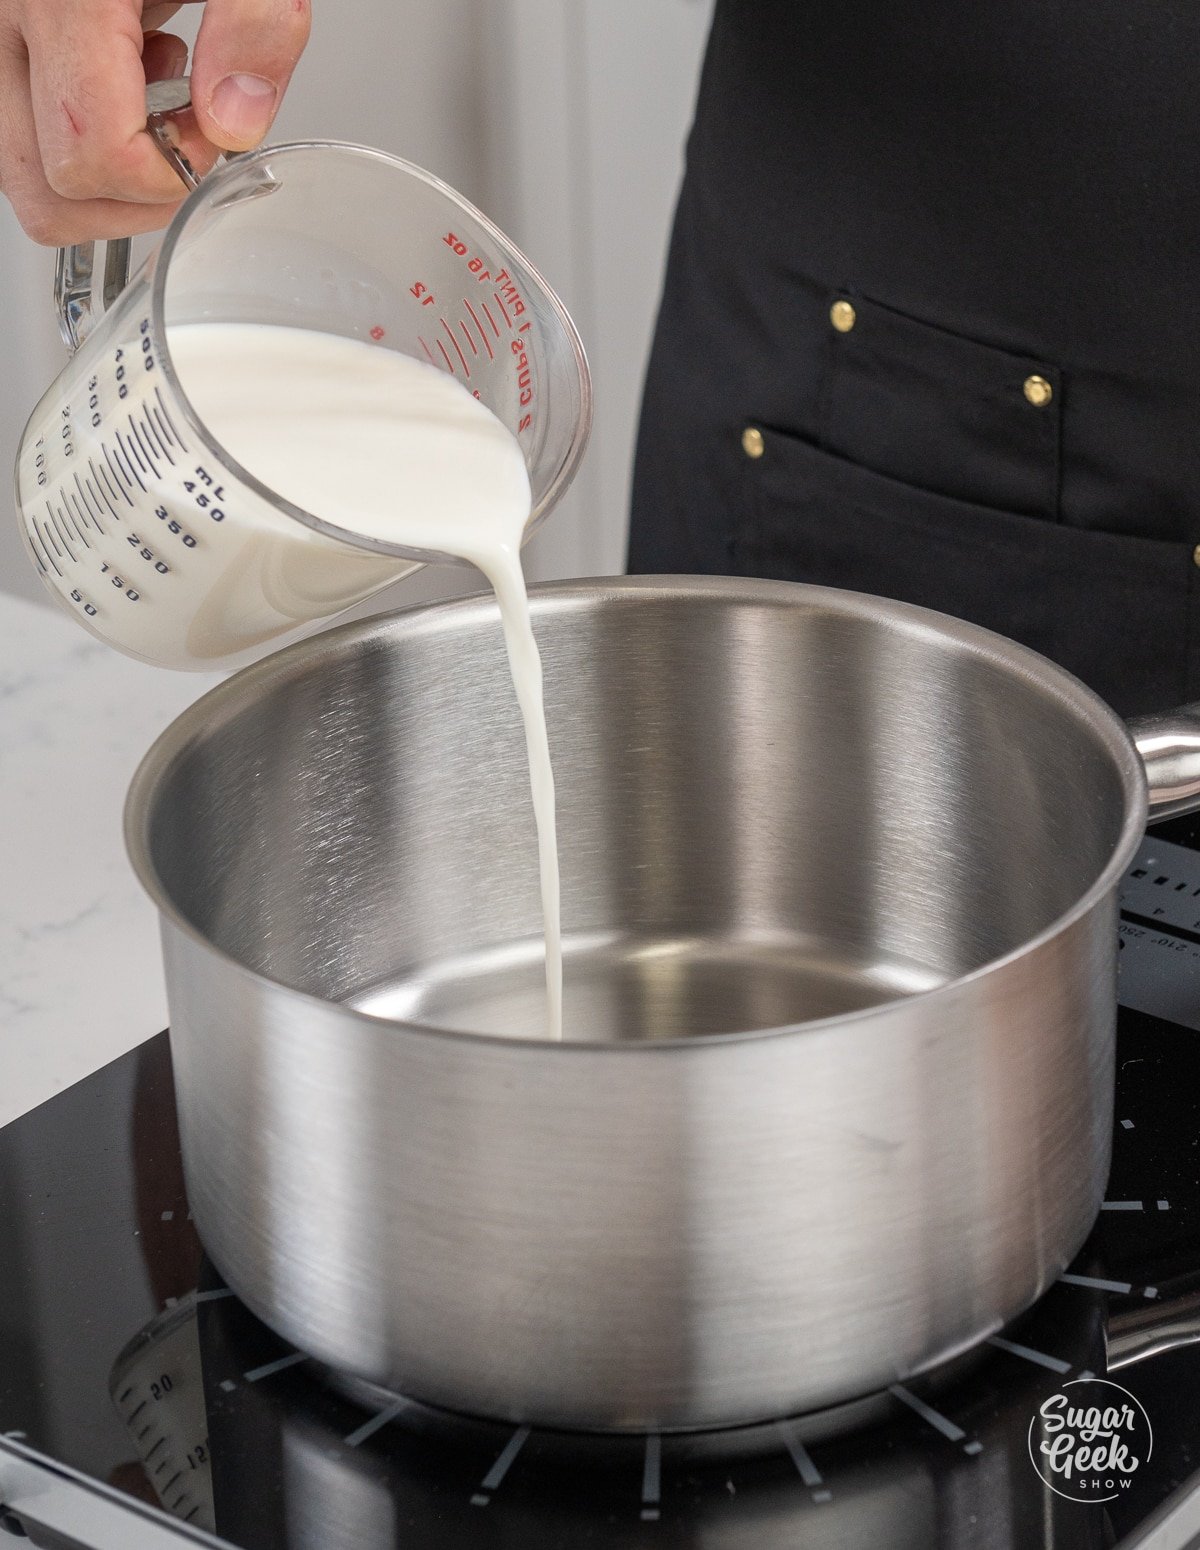 hand adding a container of milk to a metal saucepan